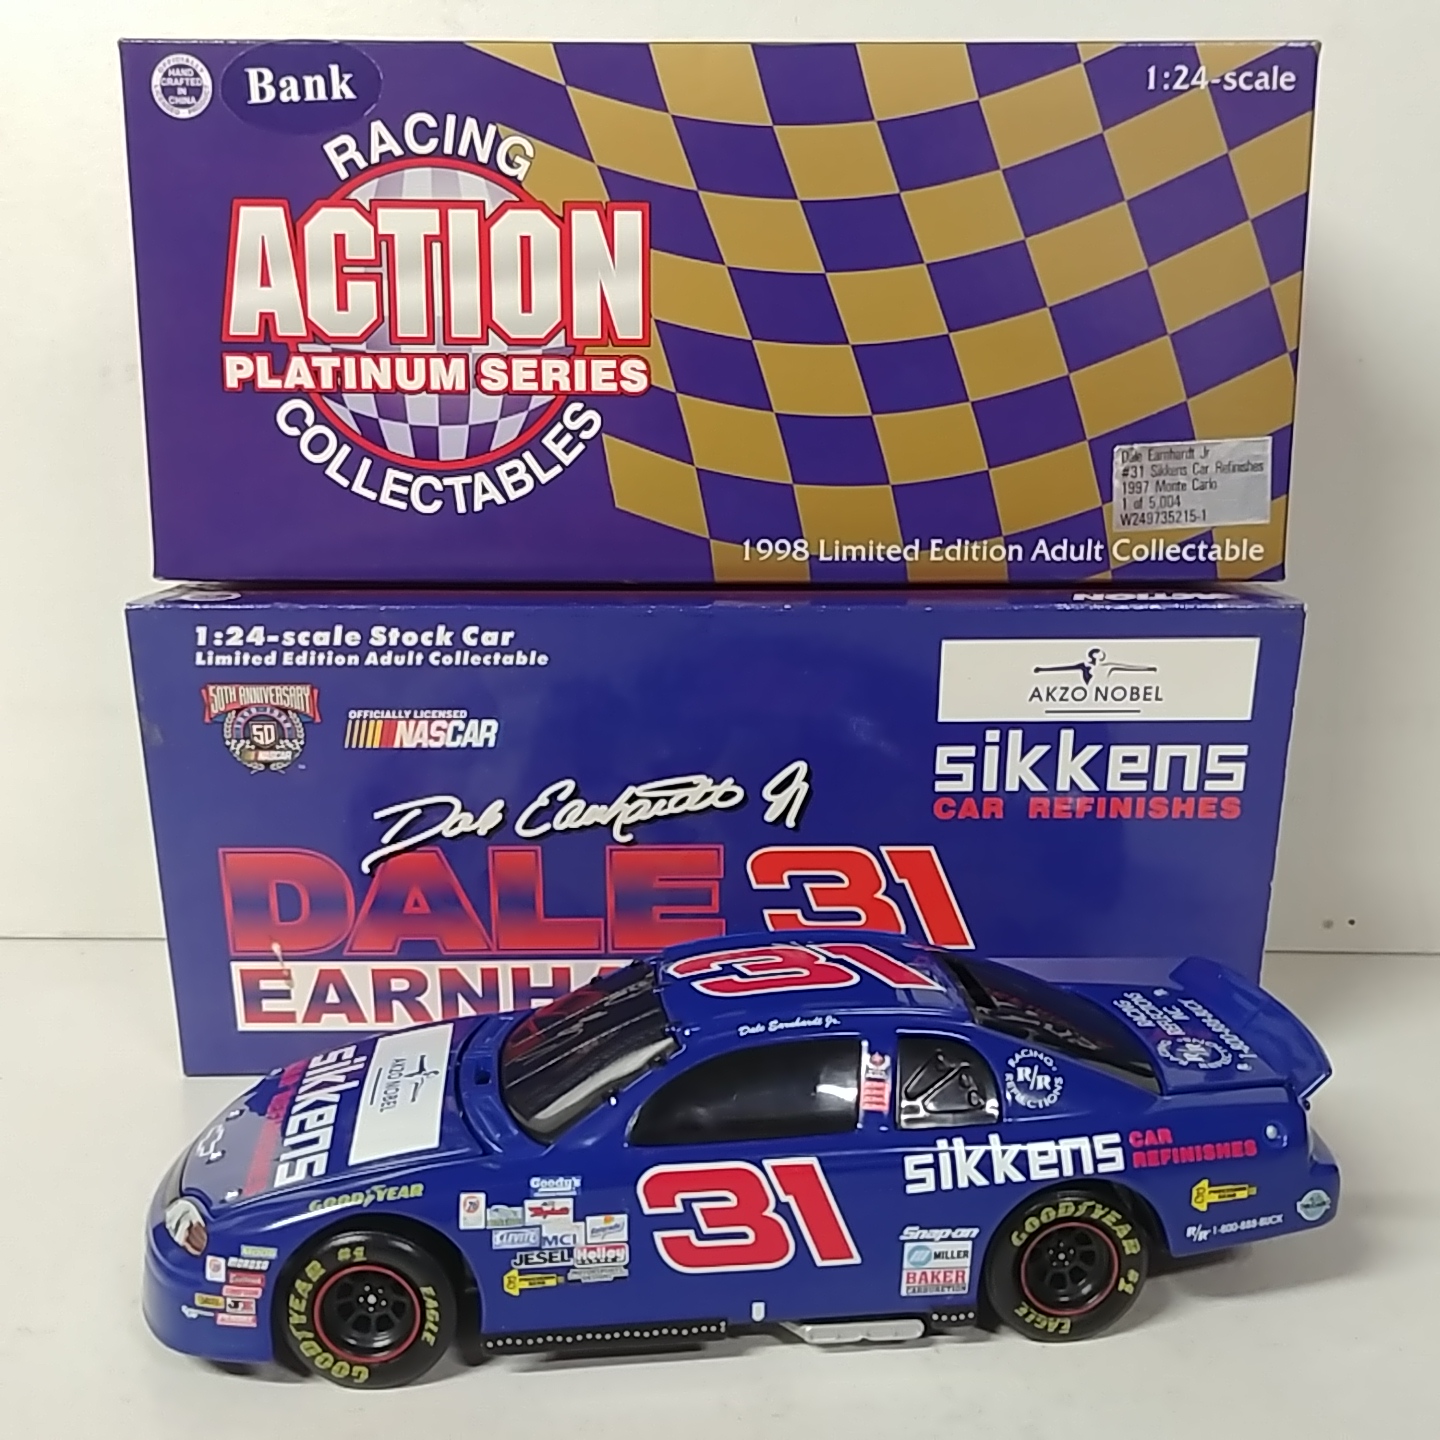 1997 Dale Earnhardt Jr 1/24th Blue Sikkens Car Refinishes b/w bank Monte Carlo